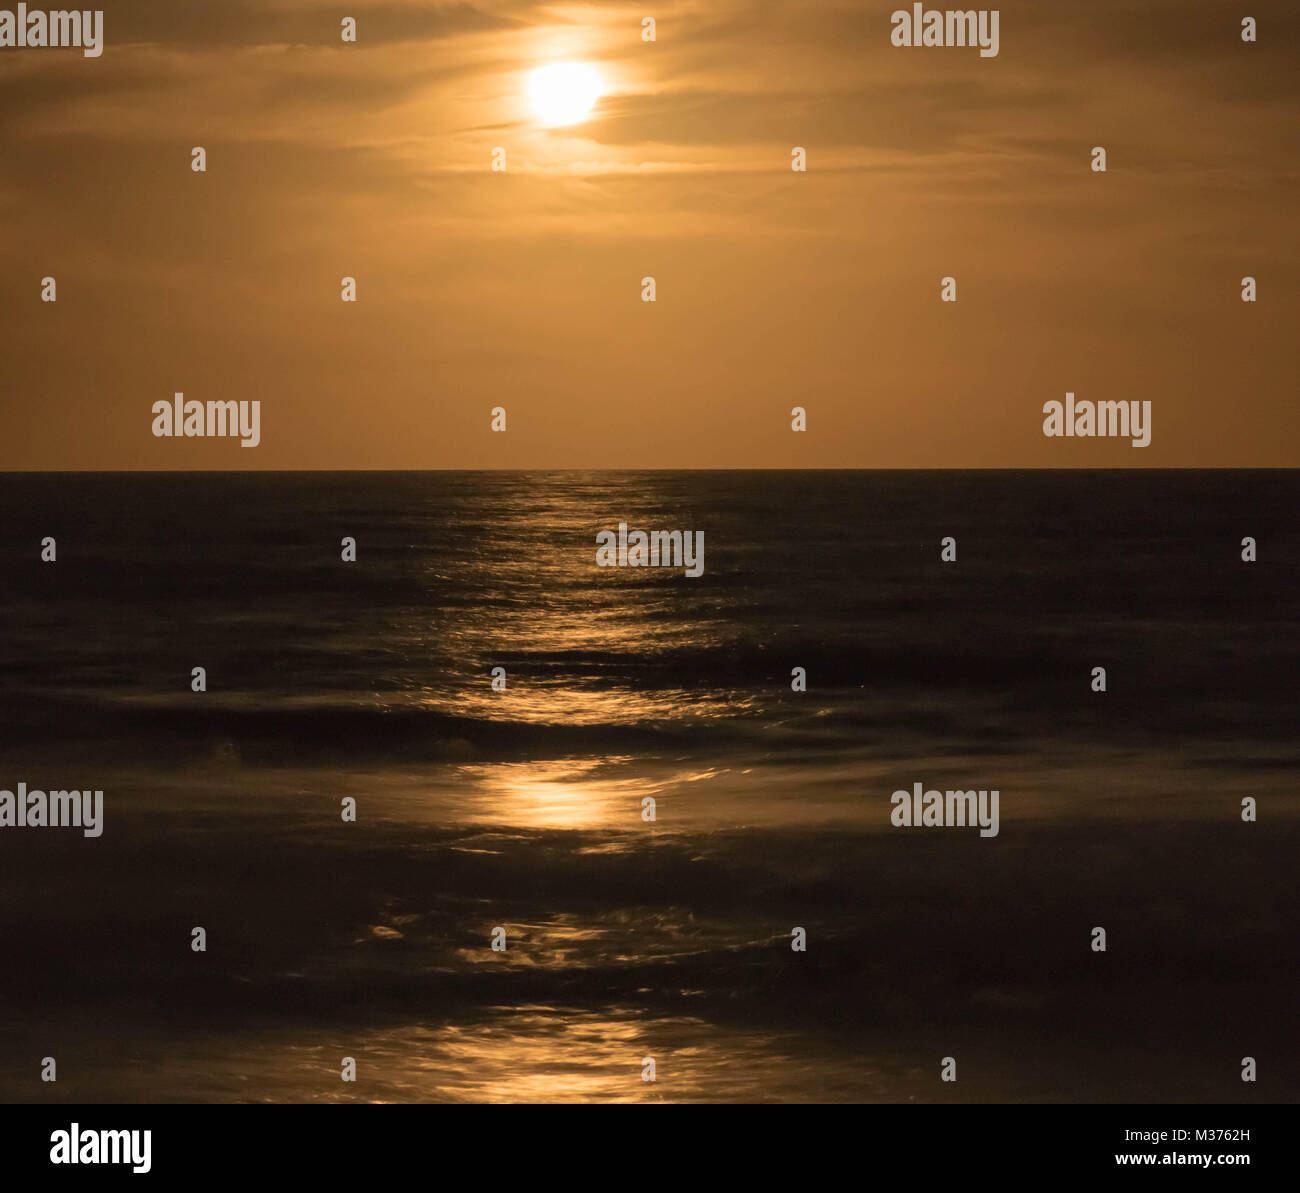 full moon rising into a warm and milky night sky over the ocean Stock Photo